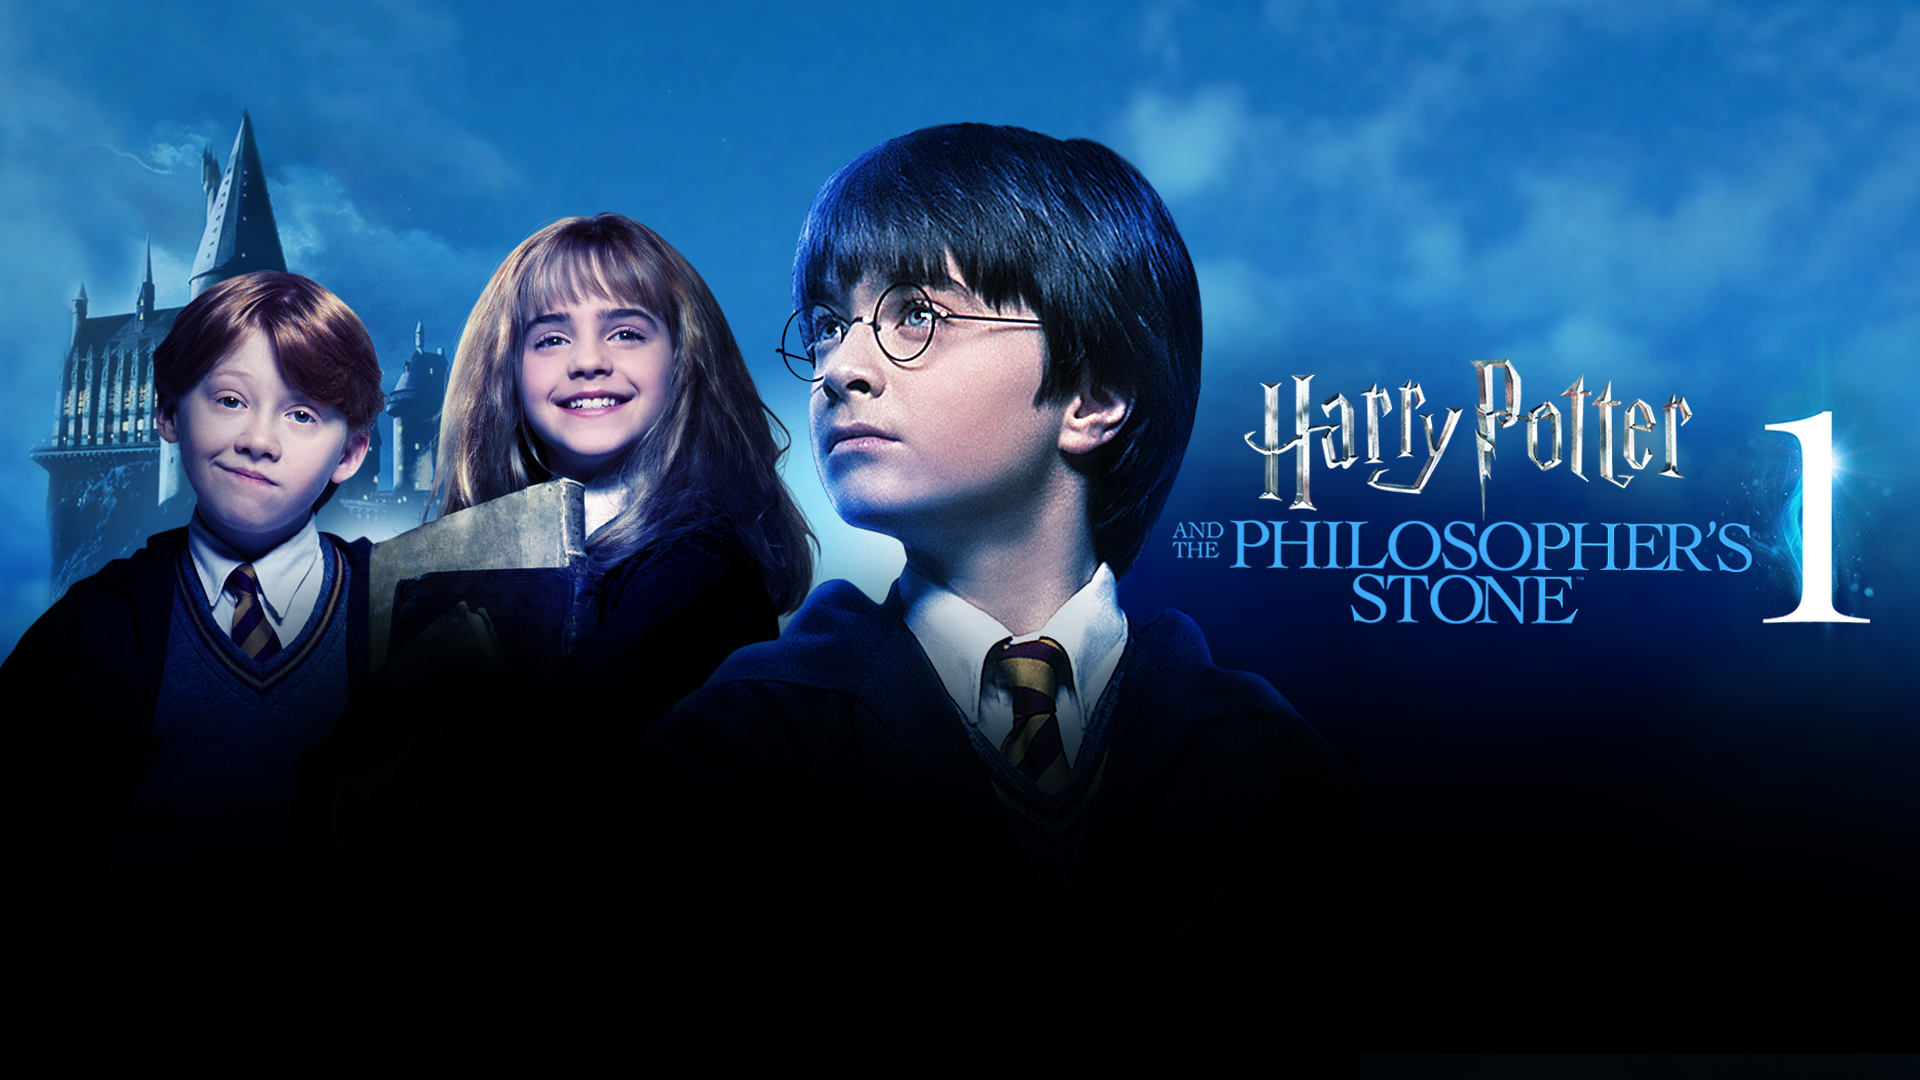 Harry Potter and the Philosopher's stone